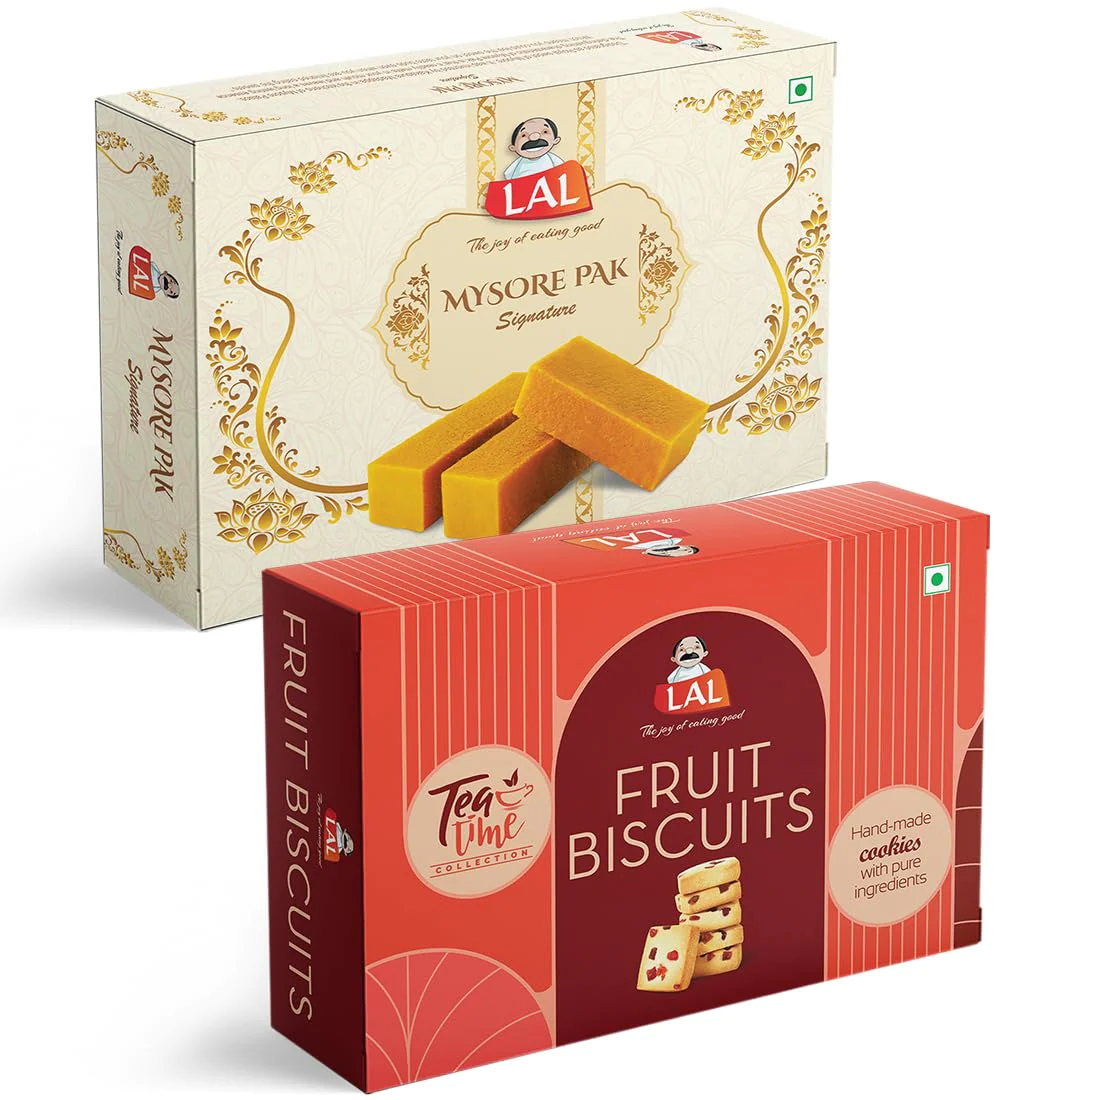 Lal sweets Mysore Pak 400gm & Fruits Biscuits 400gm